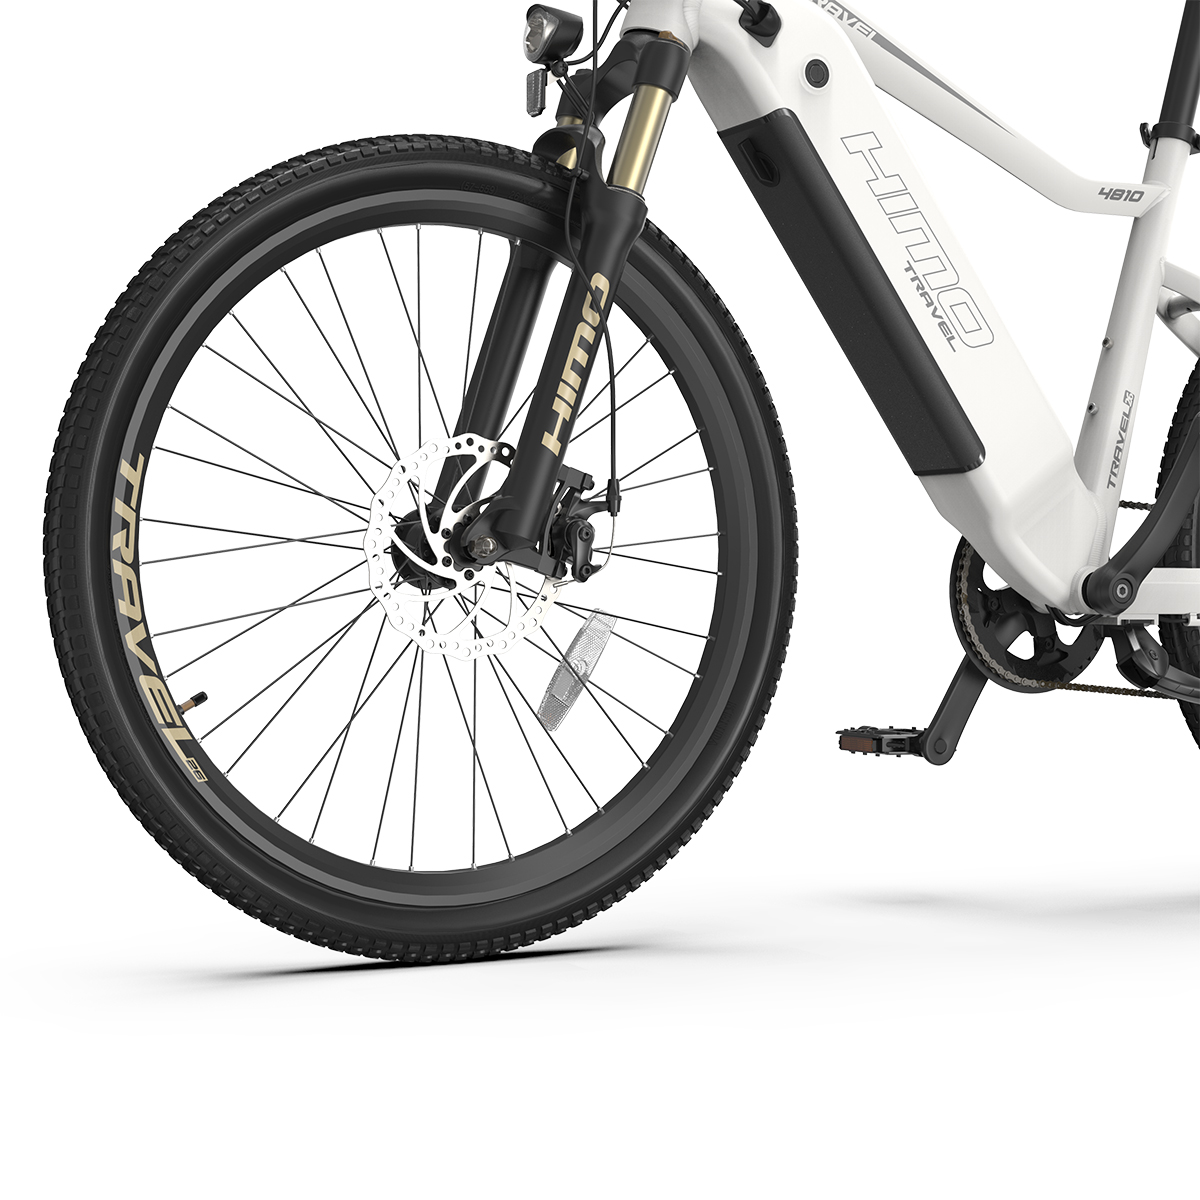 Find EU Direct HIMO C26MAX 48V 250W 10Ah 26in Electric Bike 25km/h Top Speed 80km Mileage Electric Bike for Sale on Gipsybee.com with cryptocurrencies